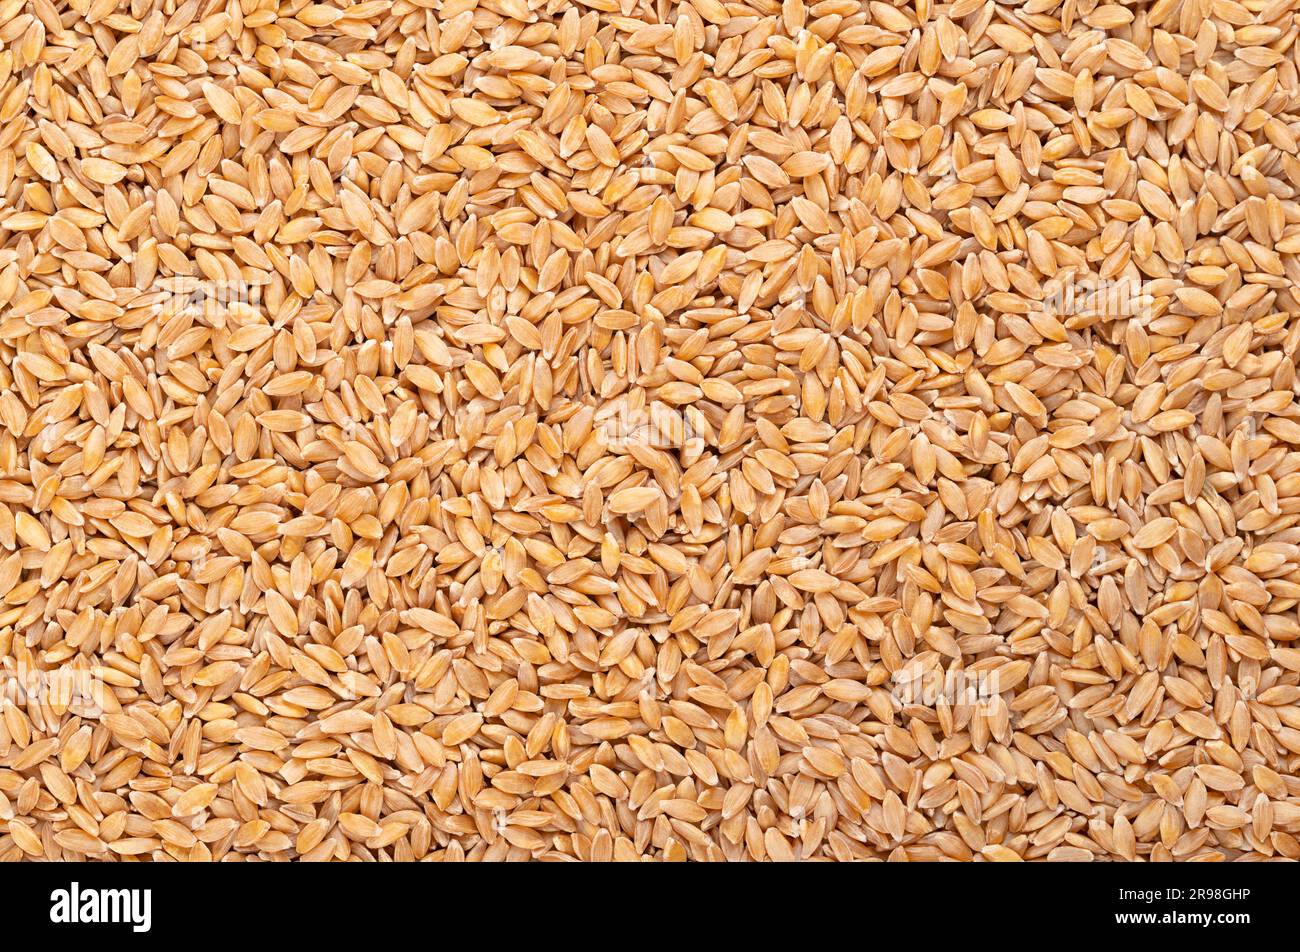 Hulled einkorn wheat, dried and husked littlespelt grains, from above. Triticum monococcum, one of the first plants to be domesticated and cultivated. Stock Photo